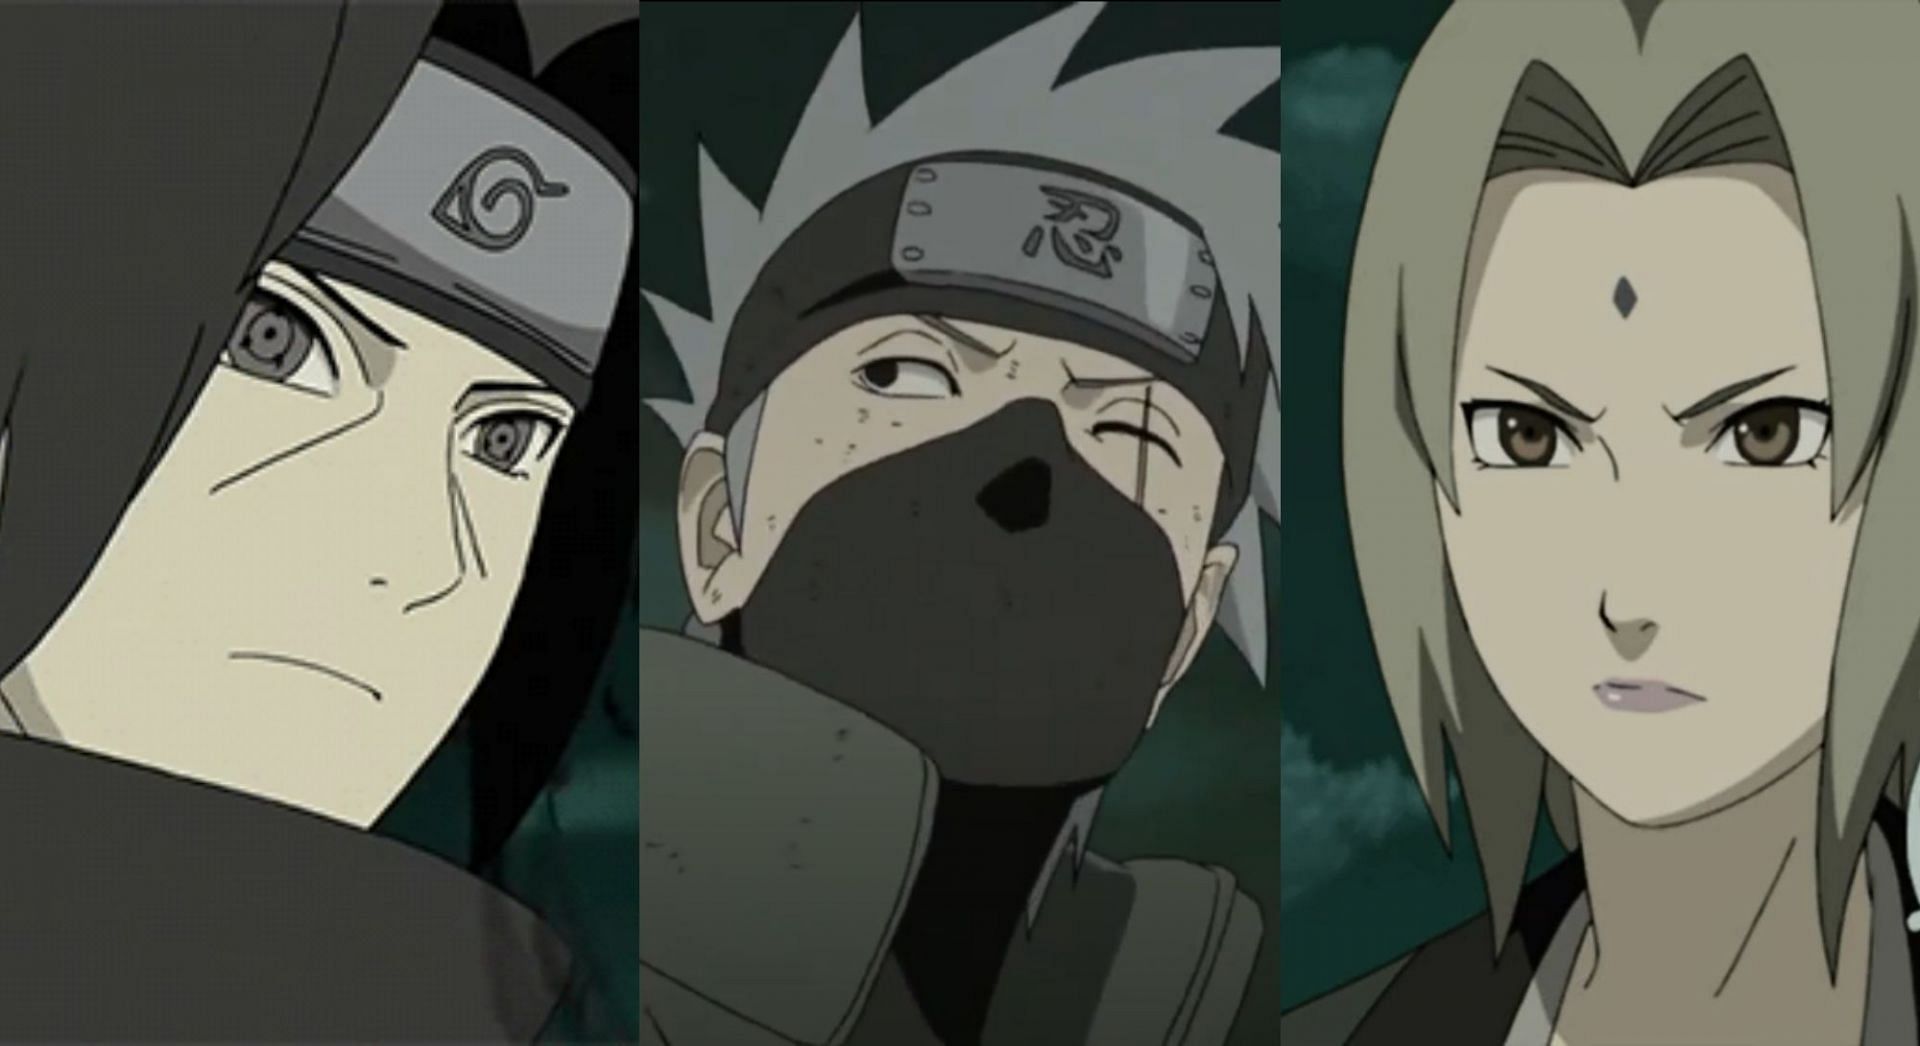 5 Naruto characters who are popular in Japan (and 5 who are loved